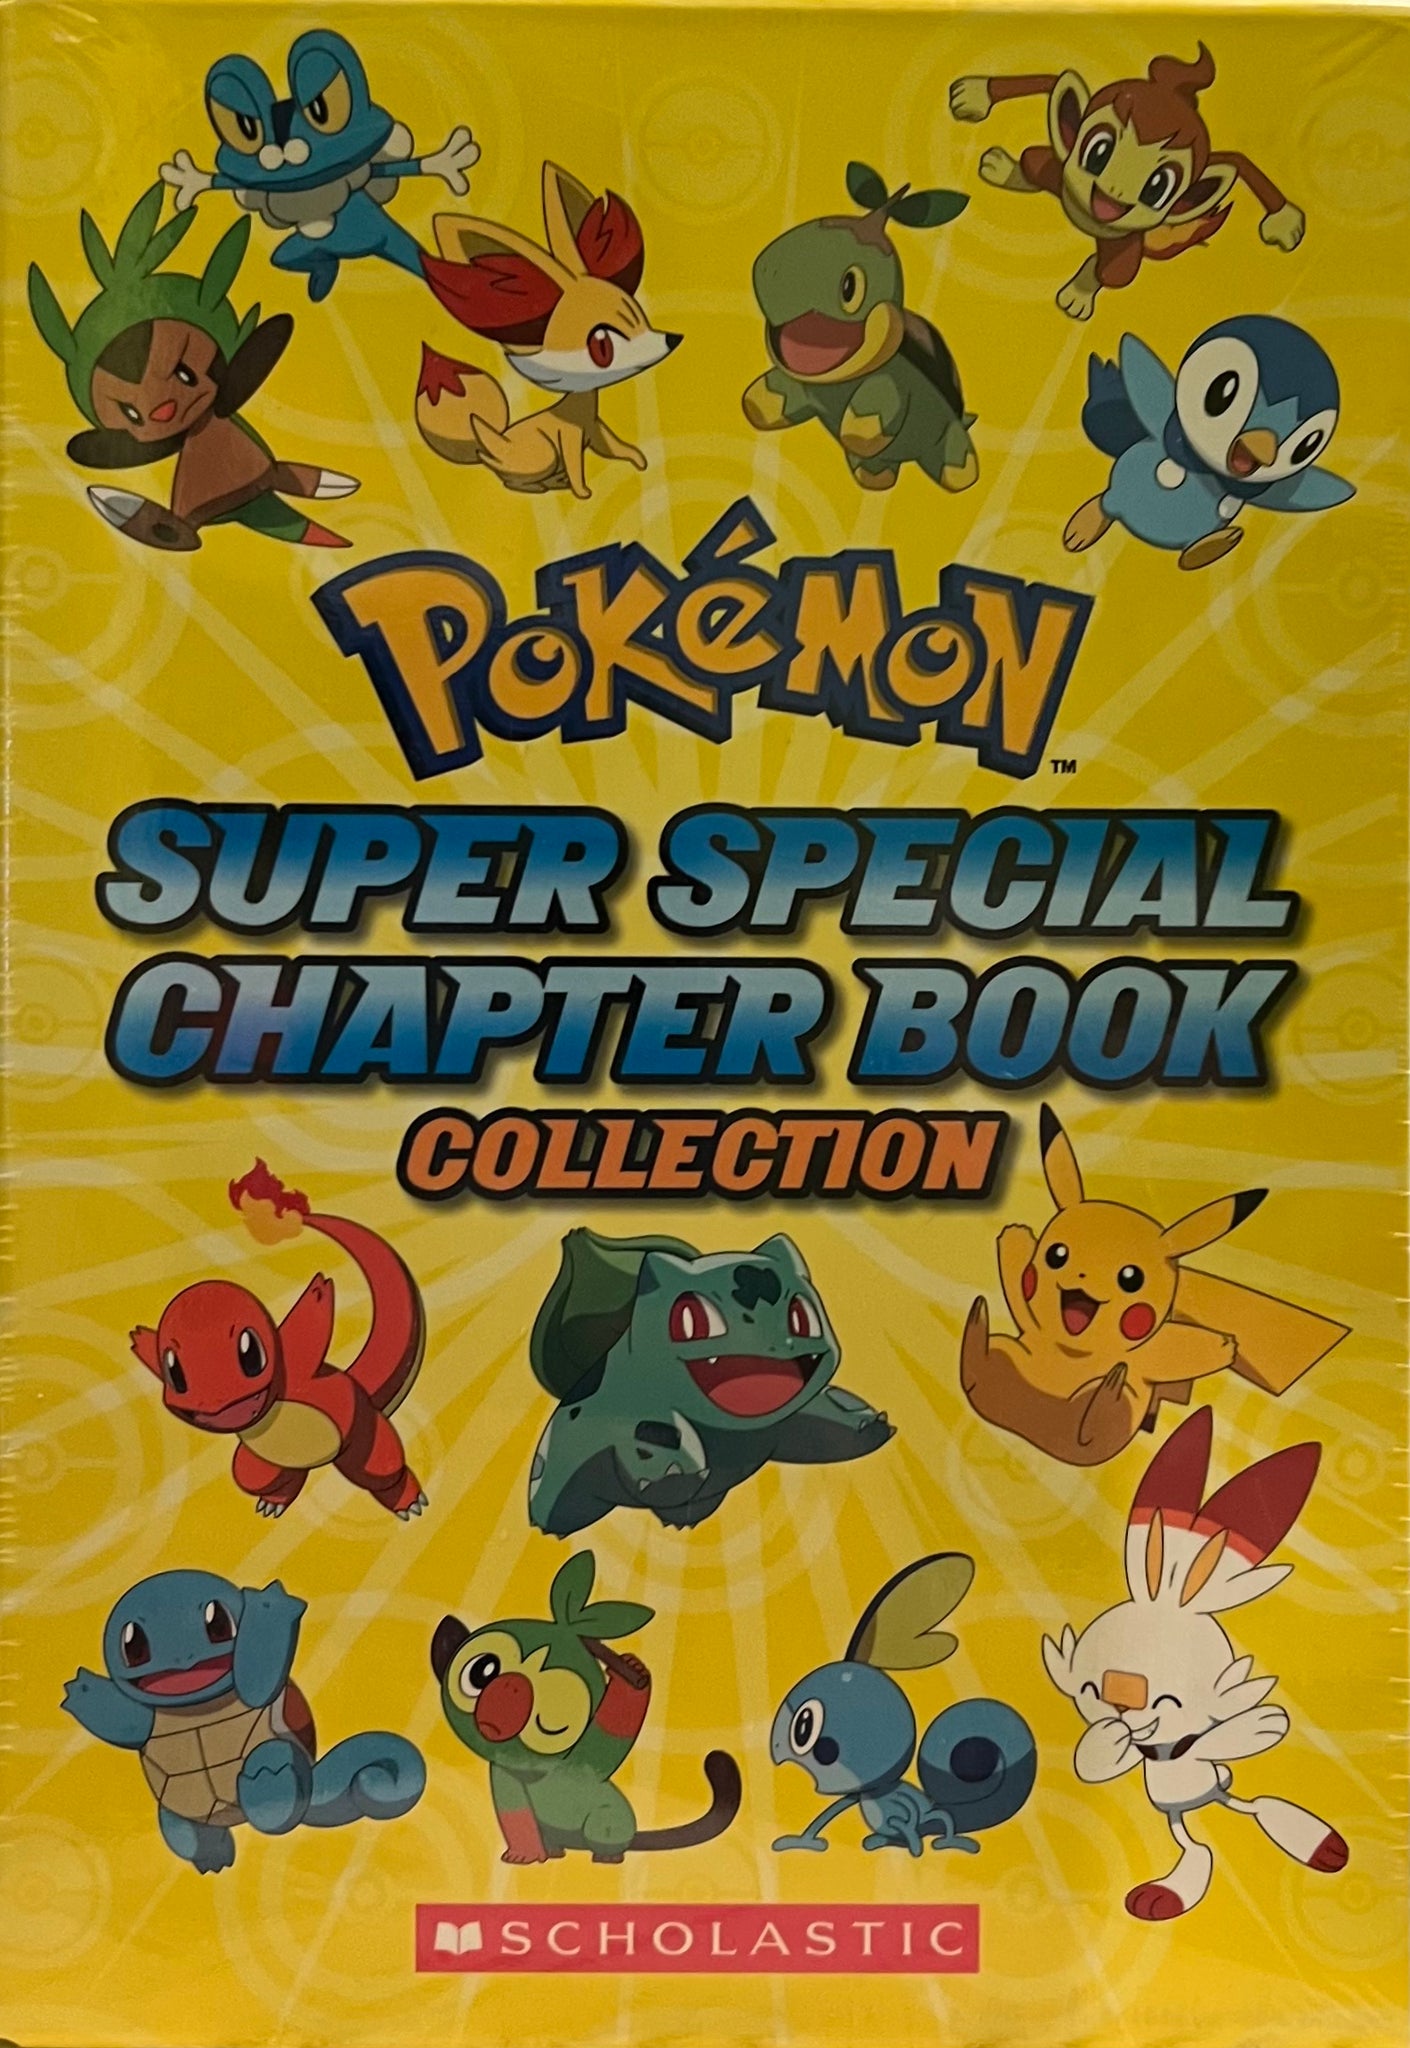 Pokémon: Super Special Chapter Book Collection